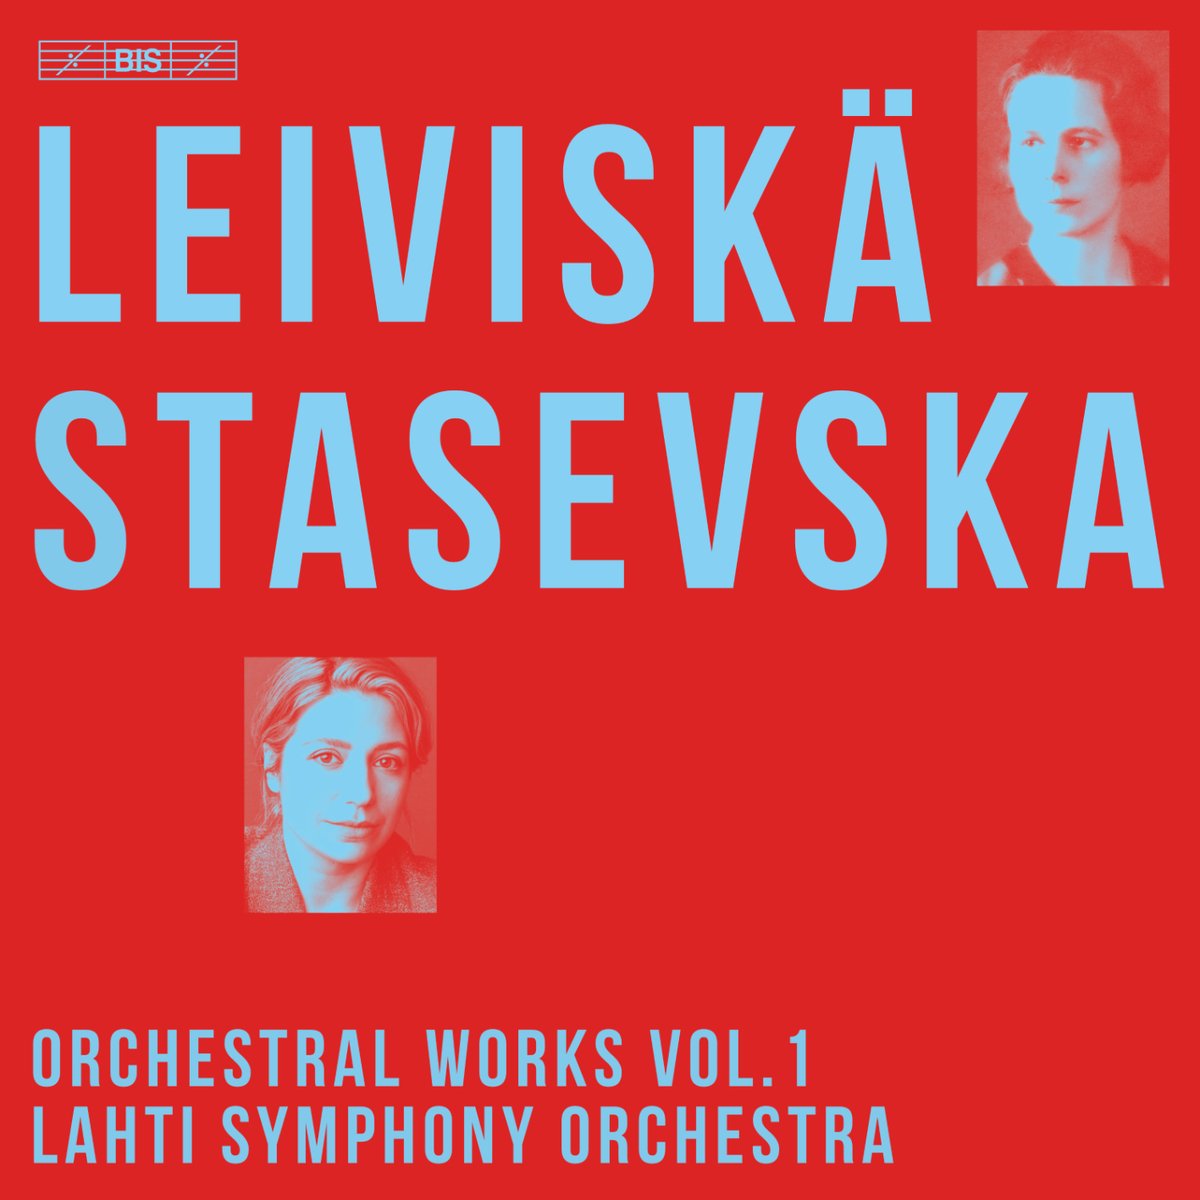 Conductor @DaliaStasevska and the Lahti Symphony Orchestra present three works by Finland’s first major female composer Helvi Leiviskä. This new recording contributes to the rediscovery of a neglected but important figure in Finnish music. Listen here: bisrecords.lnk.to/2701